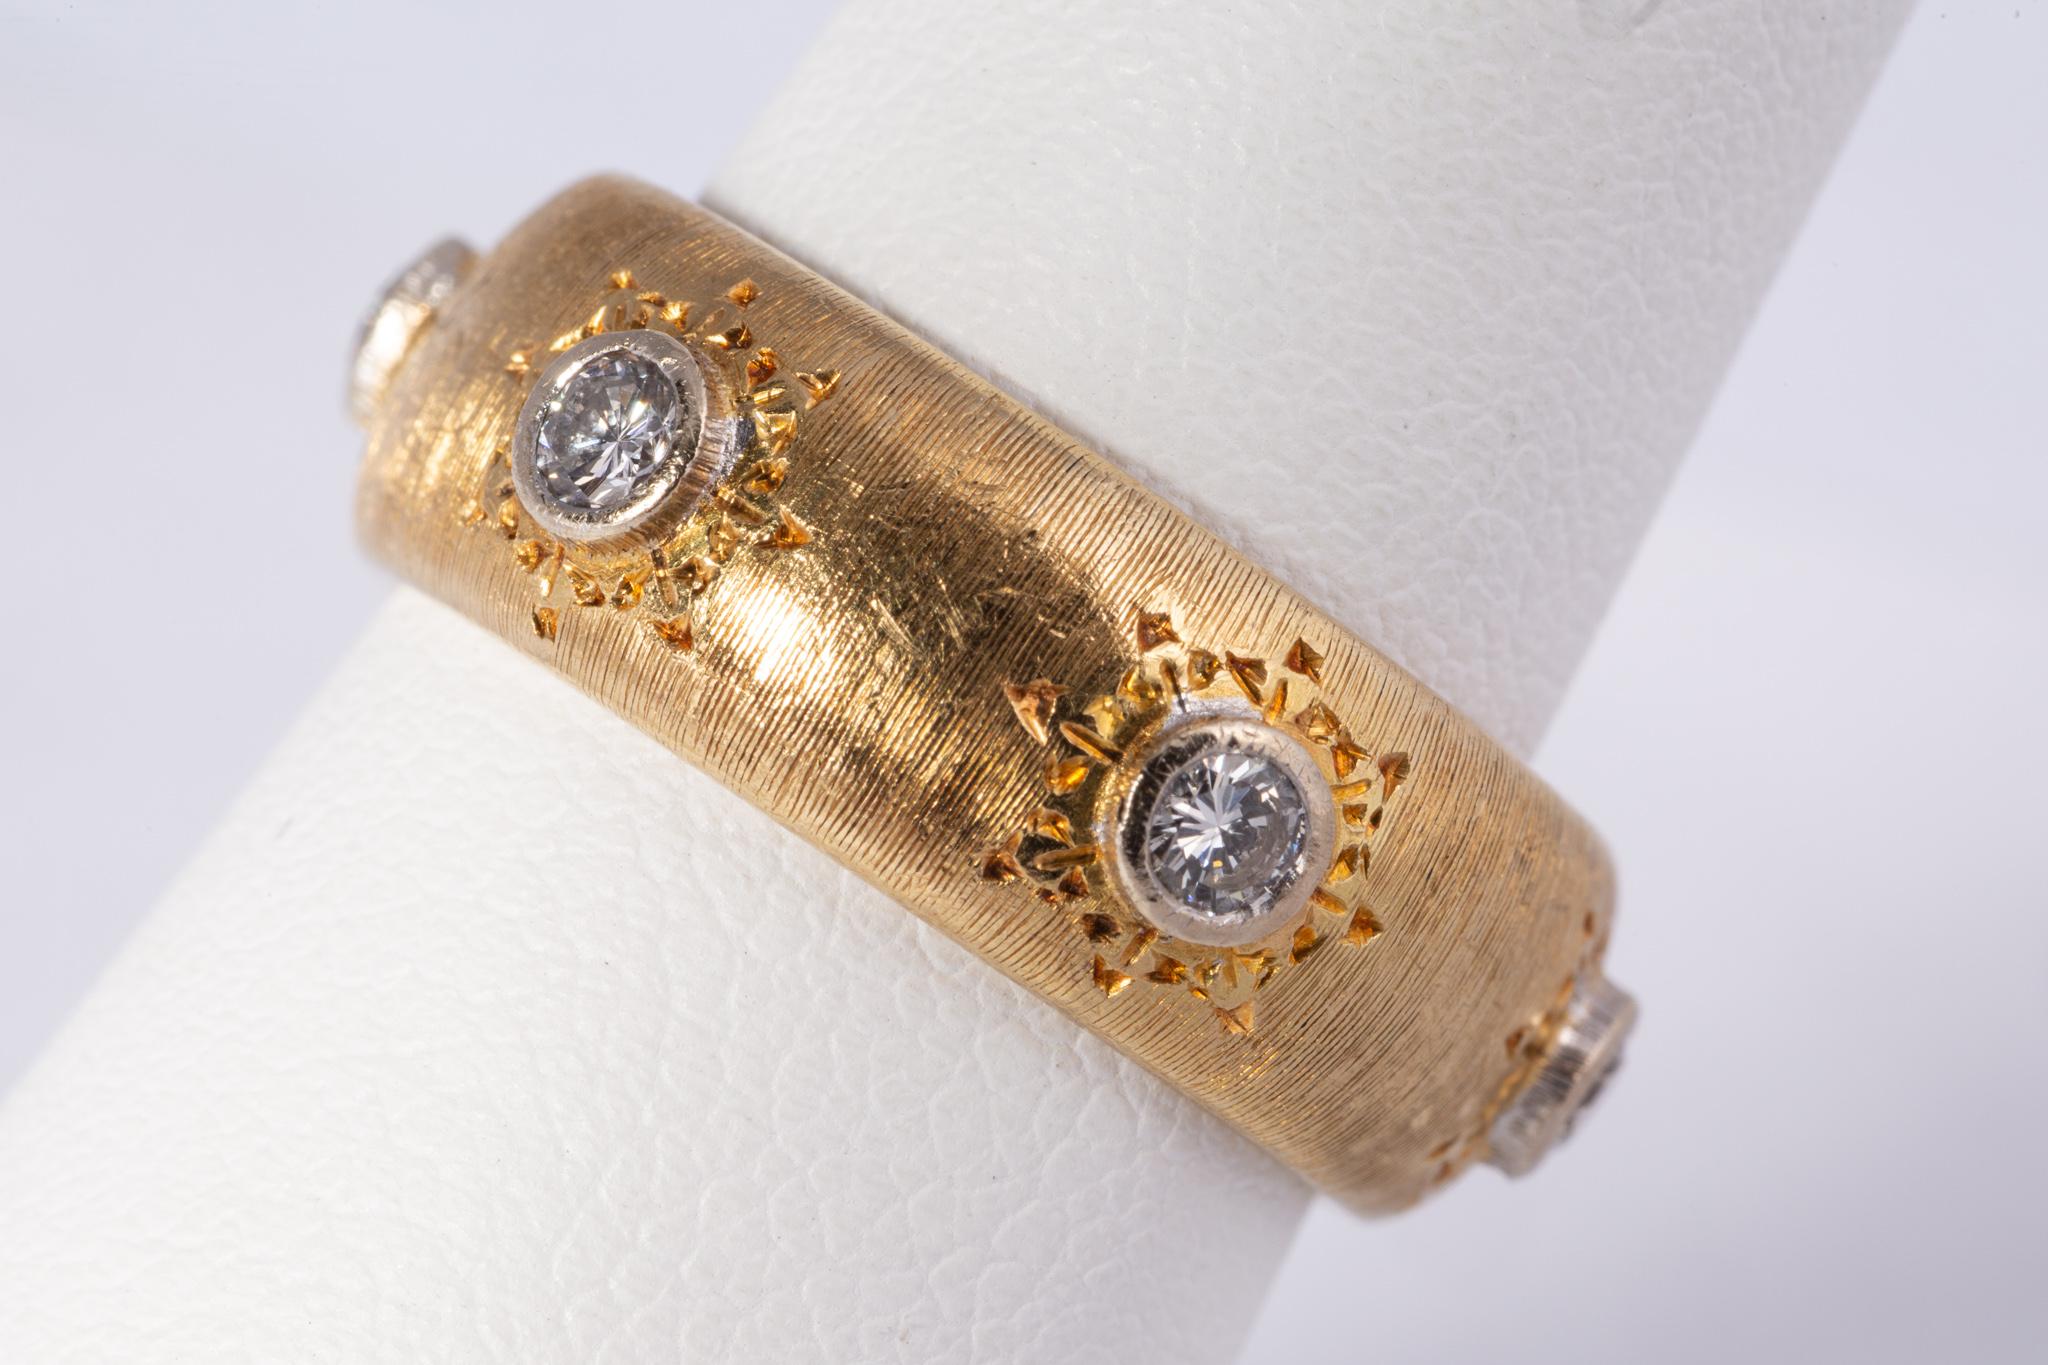 Beautiful Mario Buccellati band with 6 round brilliant cut diamonds weighing approx. .60cts total. The diamonds are E-F color and VS clarity. The ring is in the signature Florentine 18k yellow gold style with embellishments around the diamonds. The